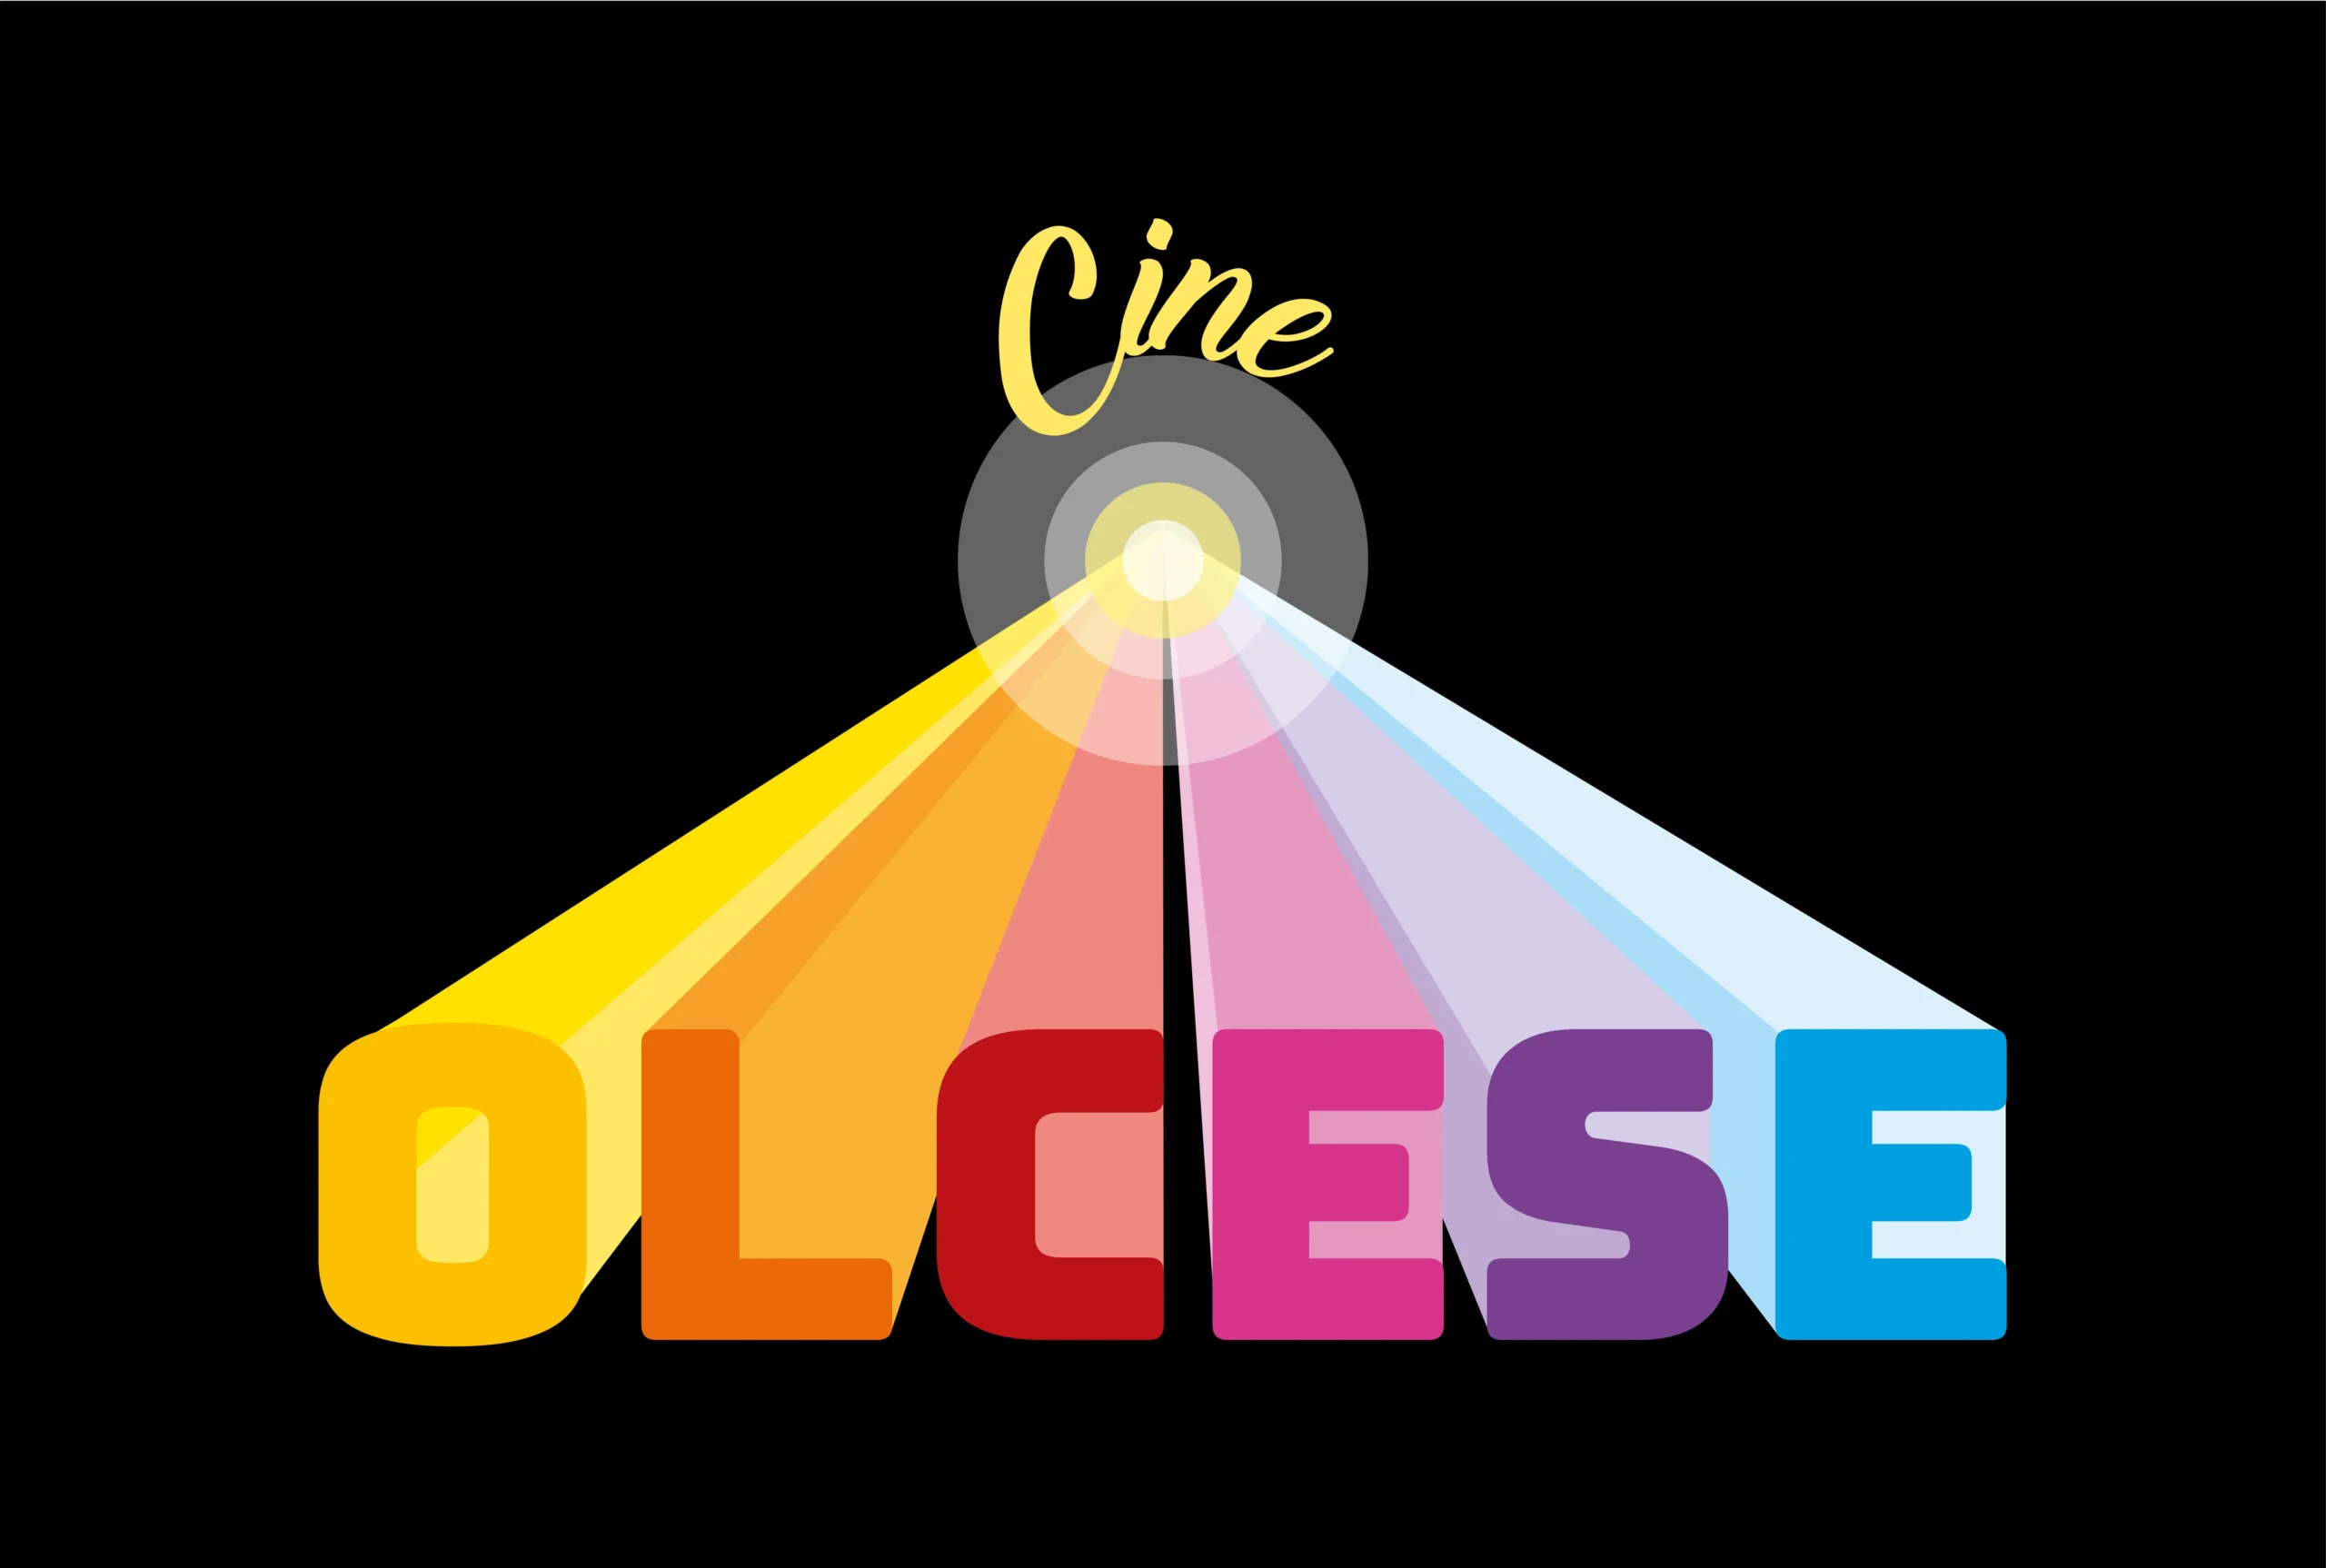 CineOLCESE